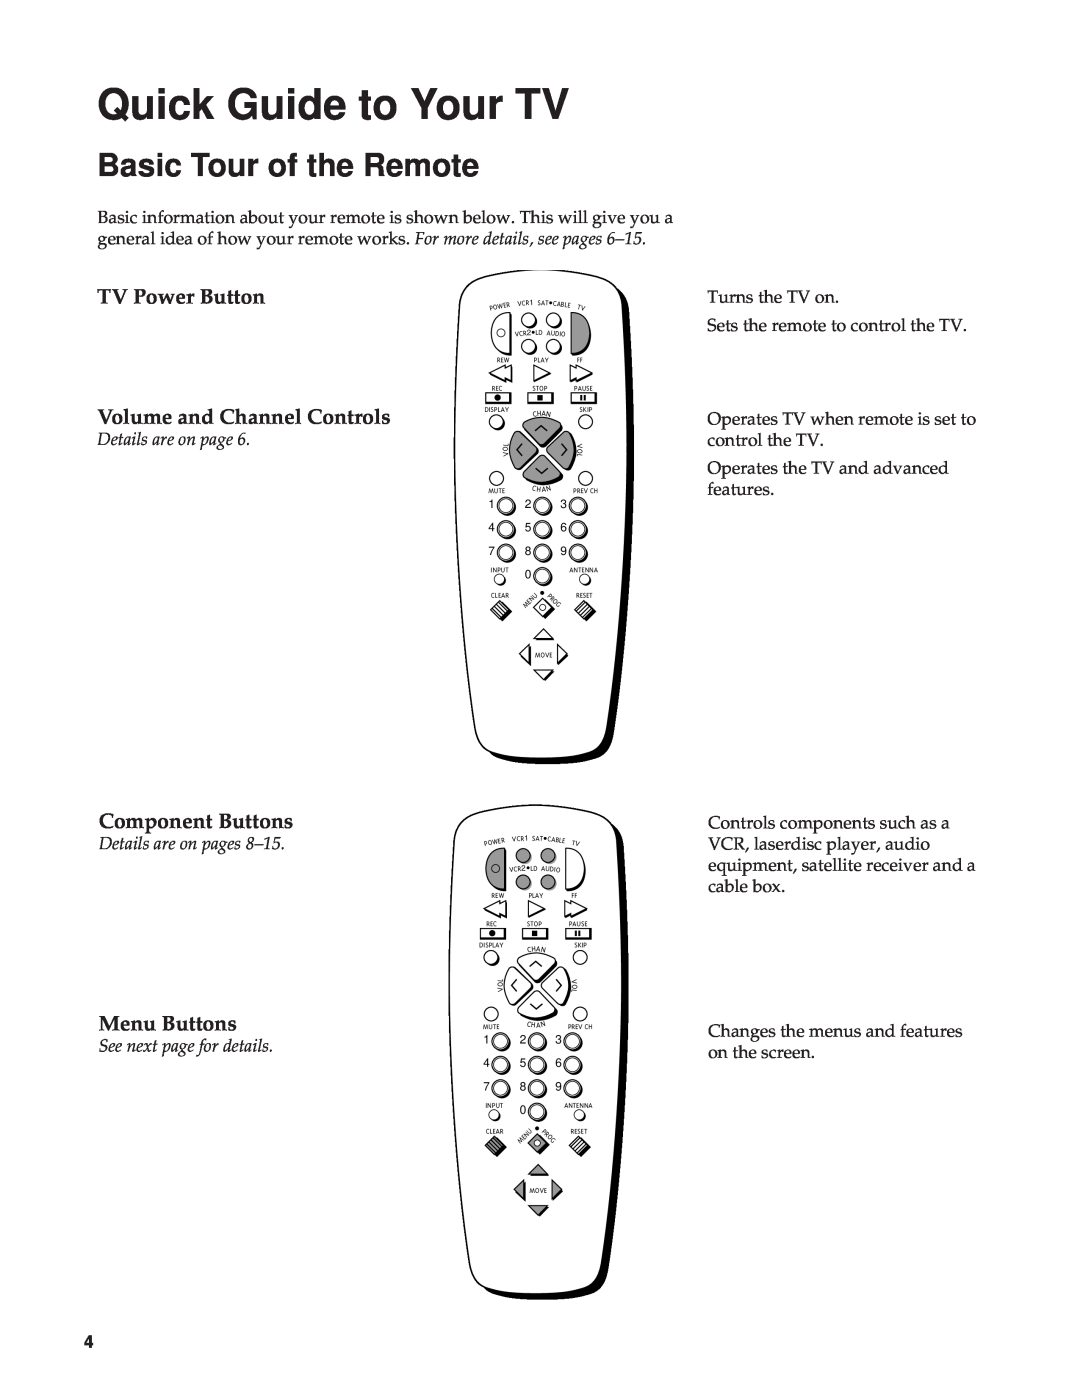 RCA 27000 manual Basic Tour of the Remote, TV Power Button Volume and Channel Controls, Component Buttons, Menu Buttons 